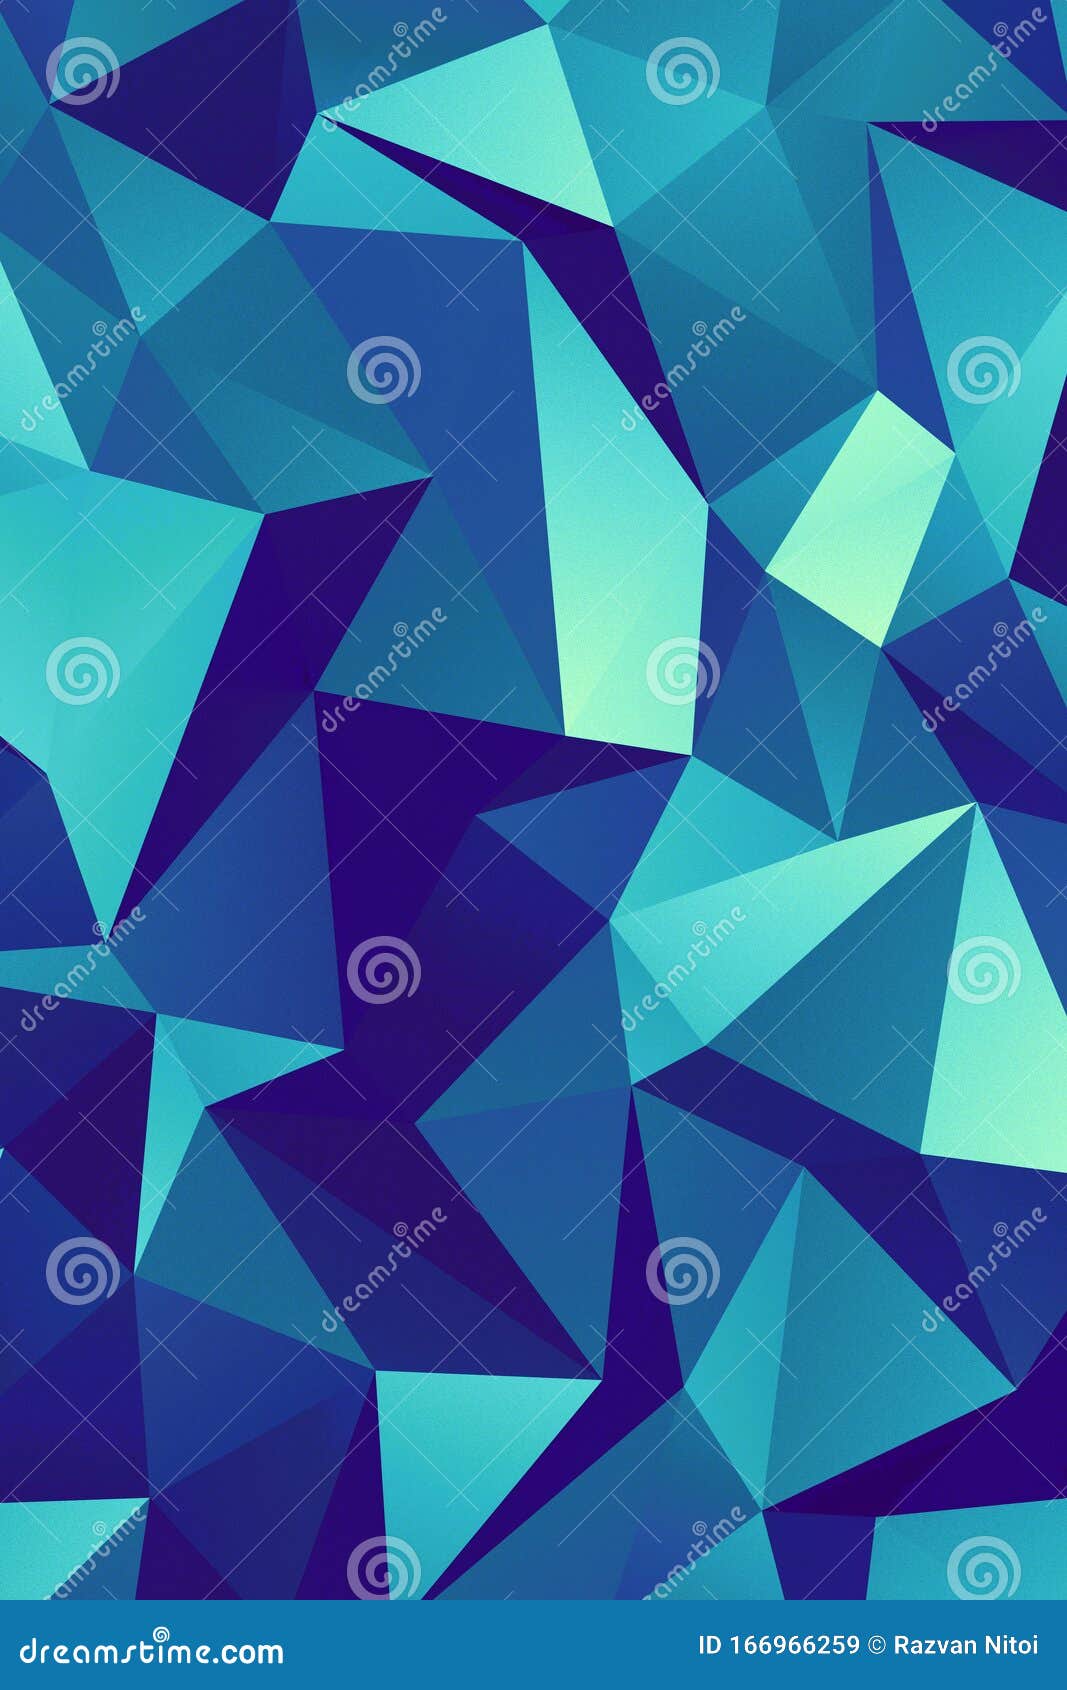 Abstract Art Geometric Background Of Triangle Multicolored